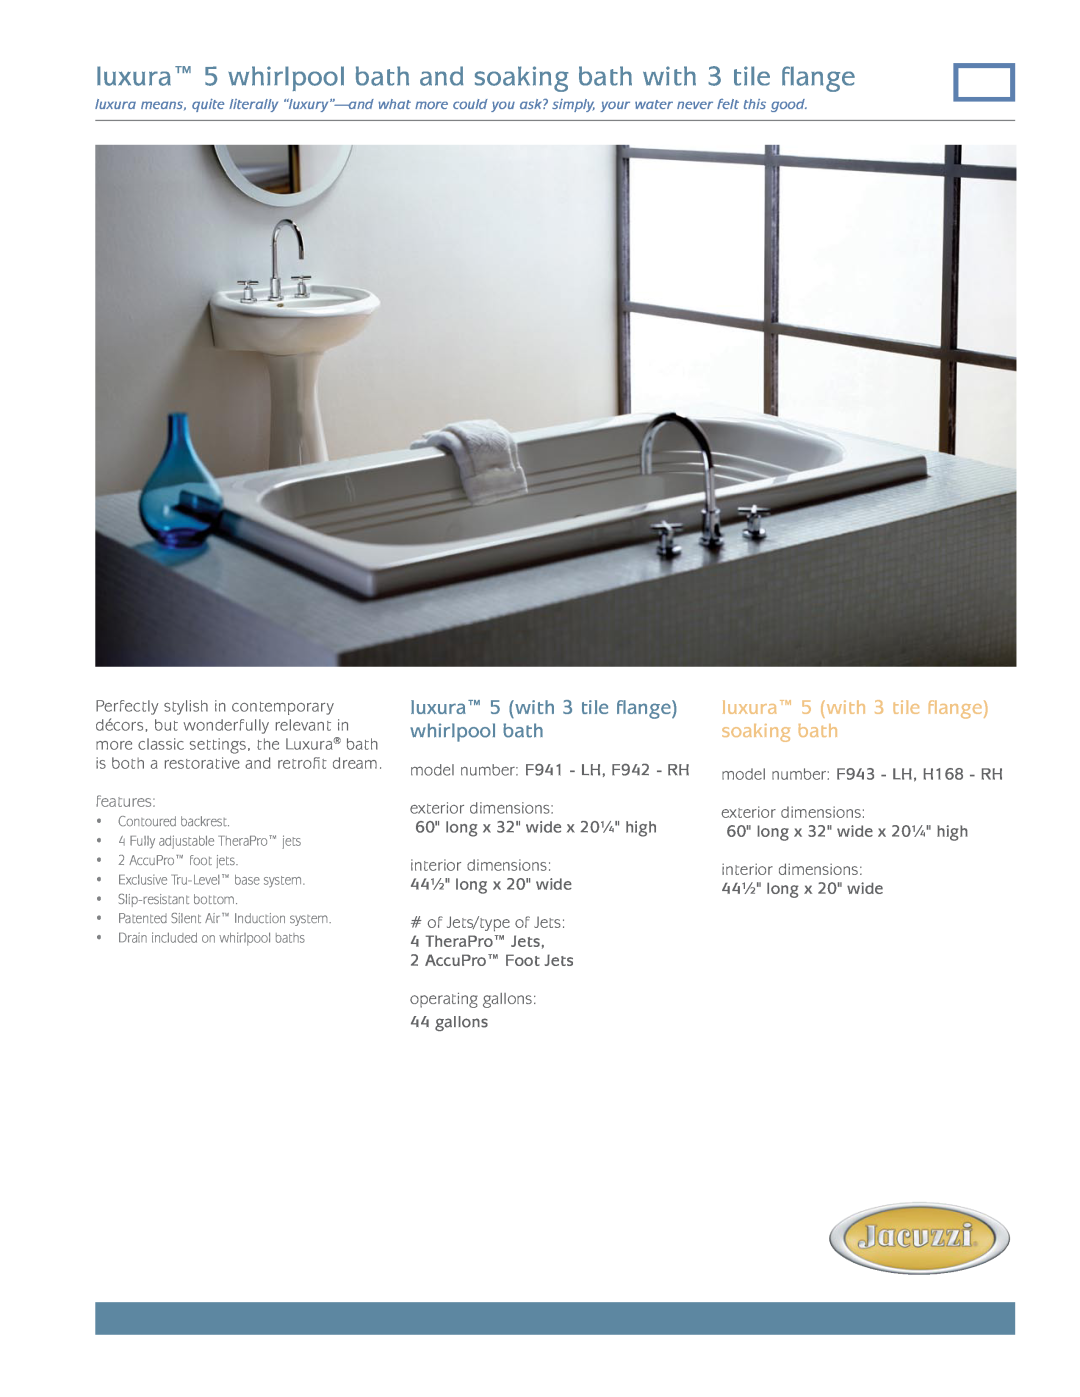 Jacuzzi F941 - LH dimensions luxura 5 with 3 tile flange whirlpool bath, luxura 5 with 3 tile flange soaking bath 